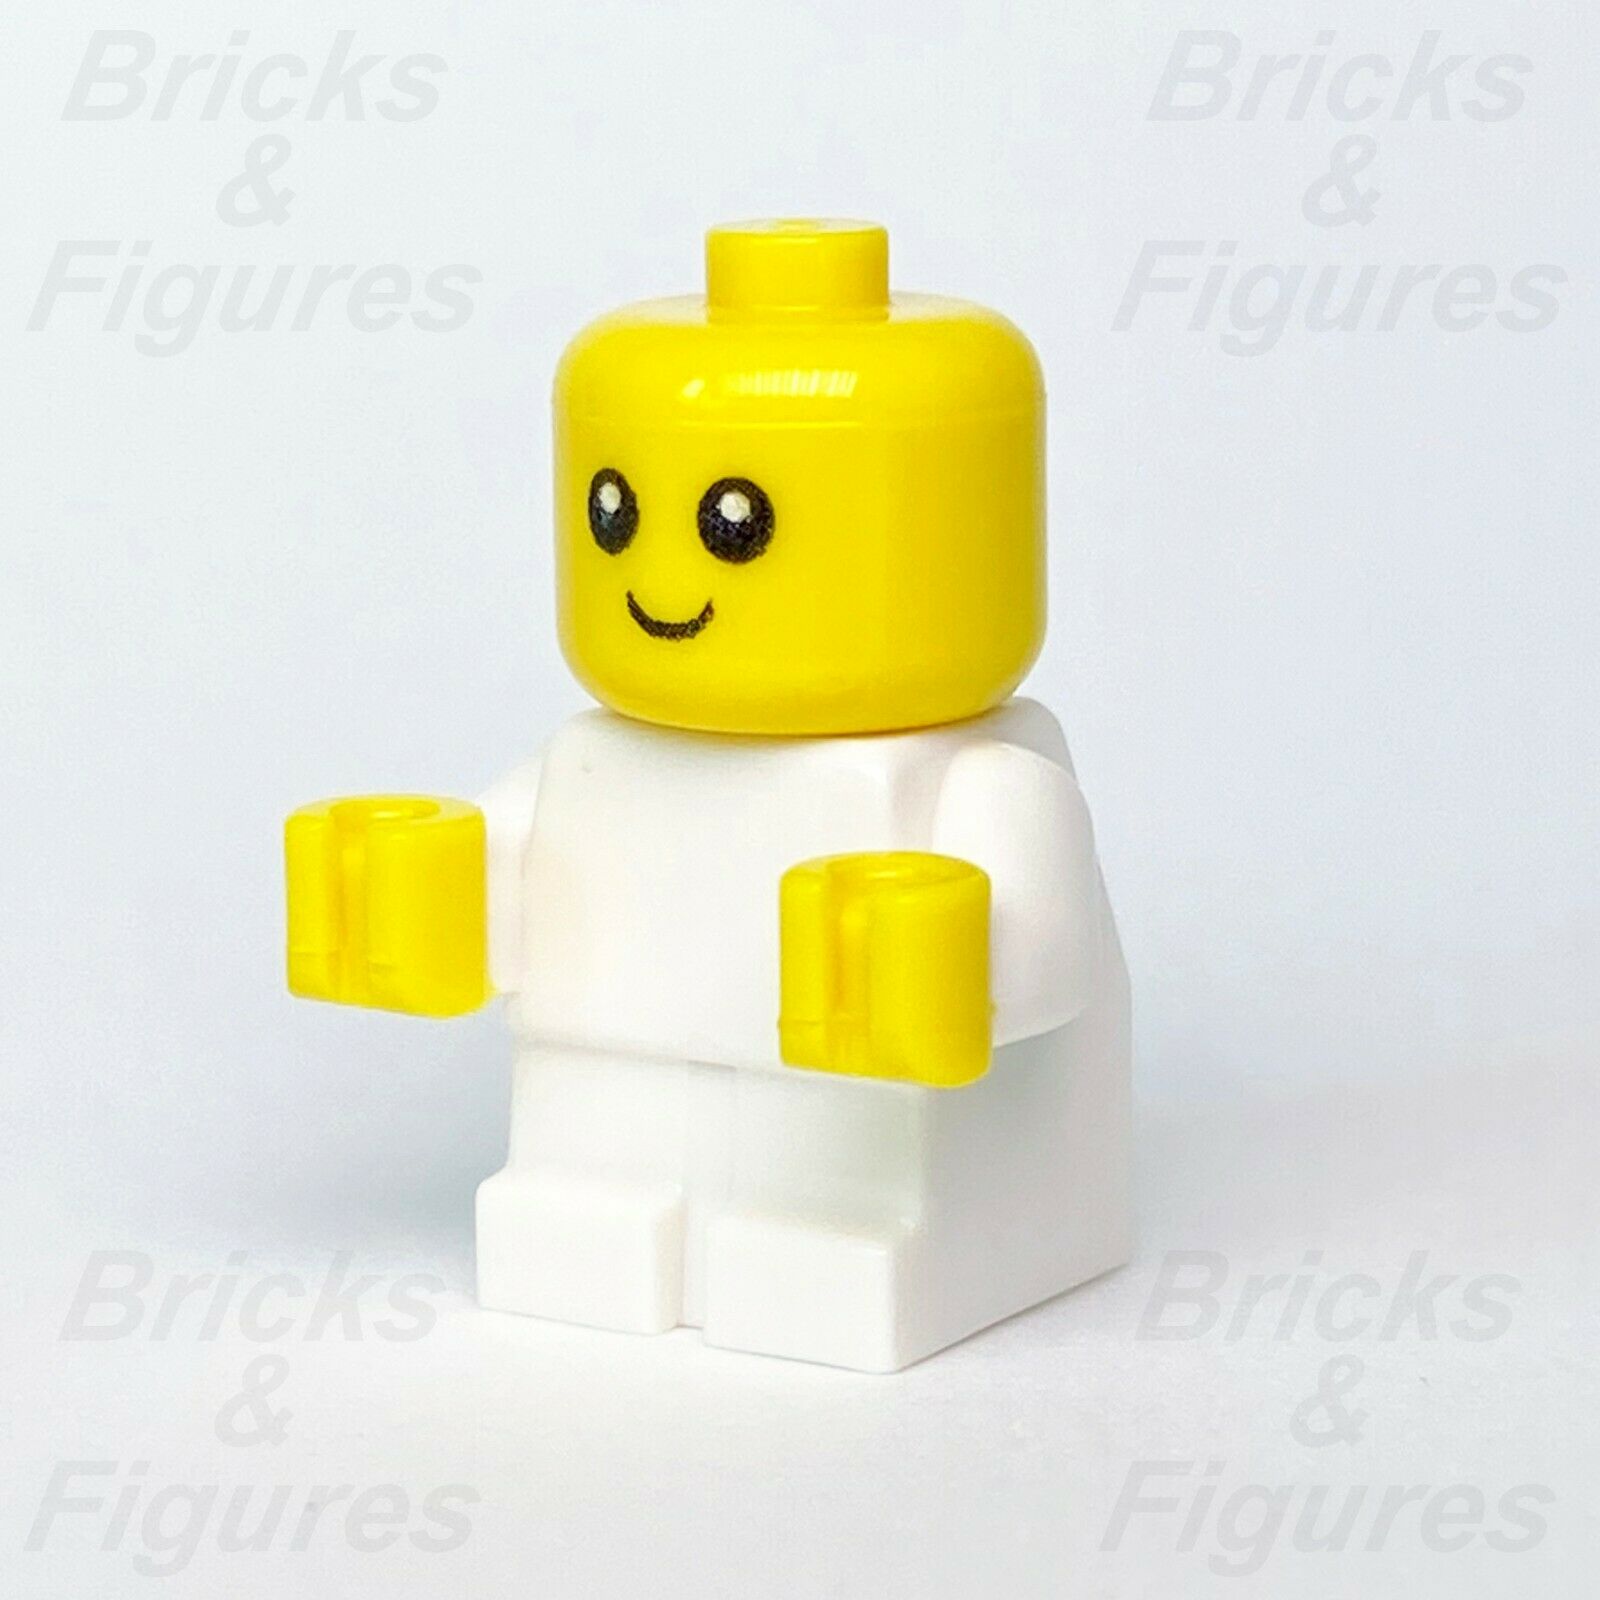 New Town City LEGO Baby with White Body Minifigure Recreation 60134 45022 10255 - Bricks & Figures